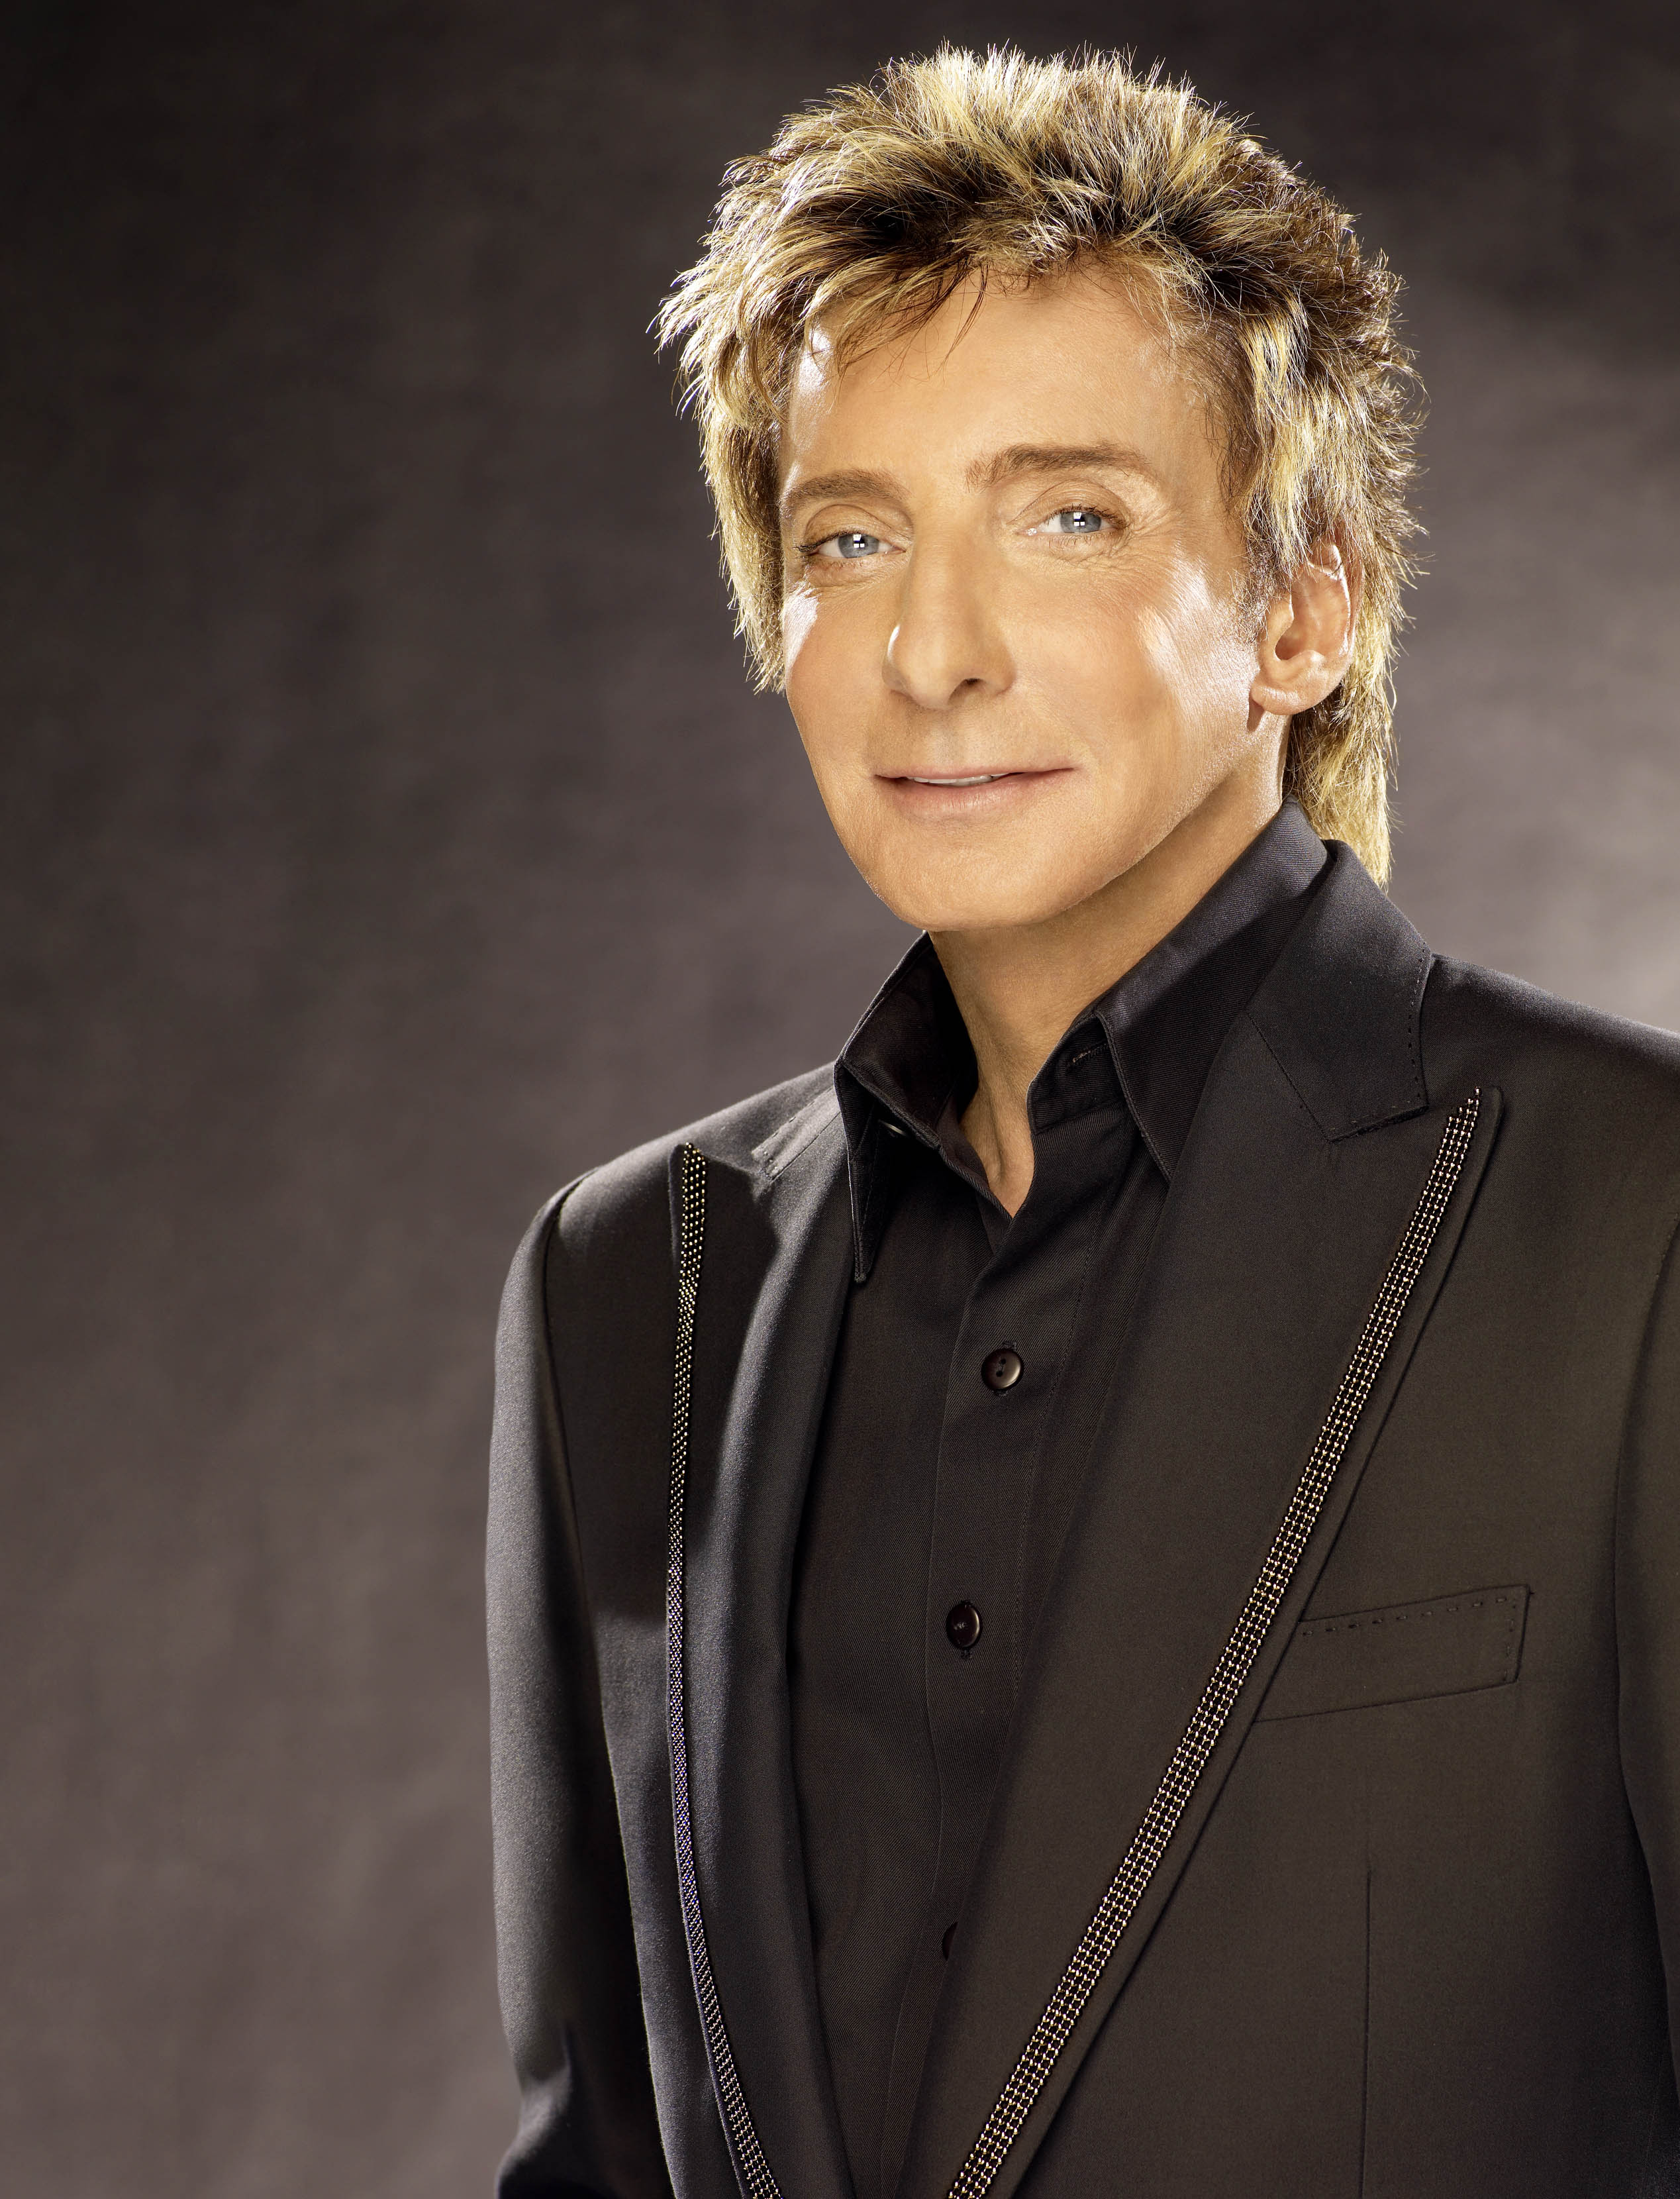 HD Quality Wallpaper | Collection: Music, 2537x3320 Barry Manilow